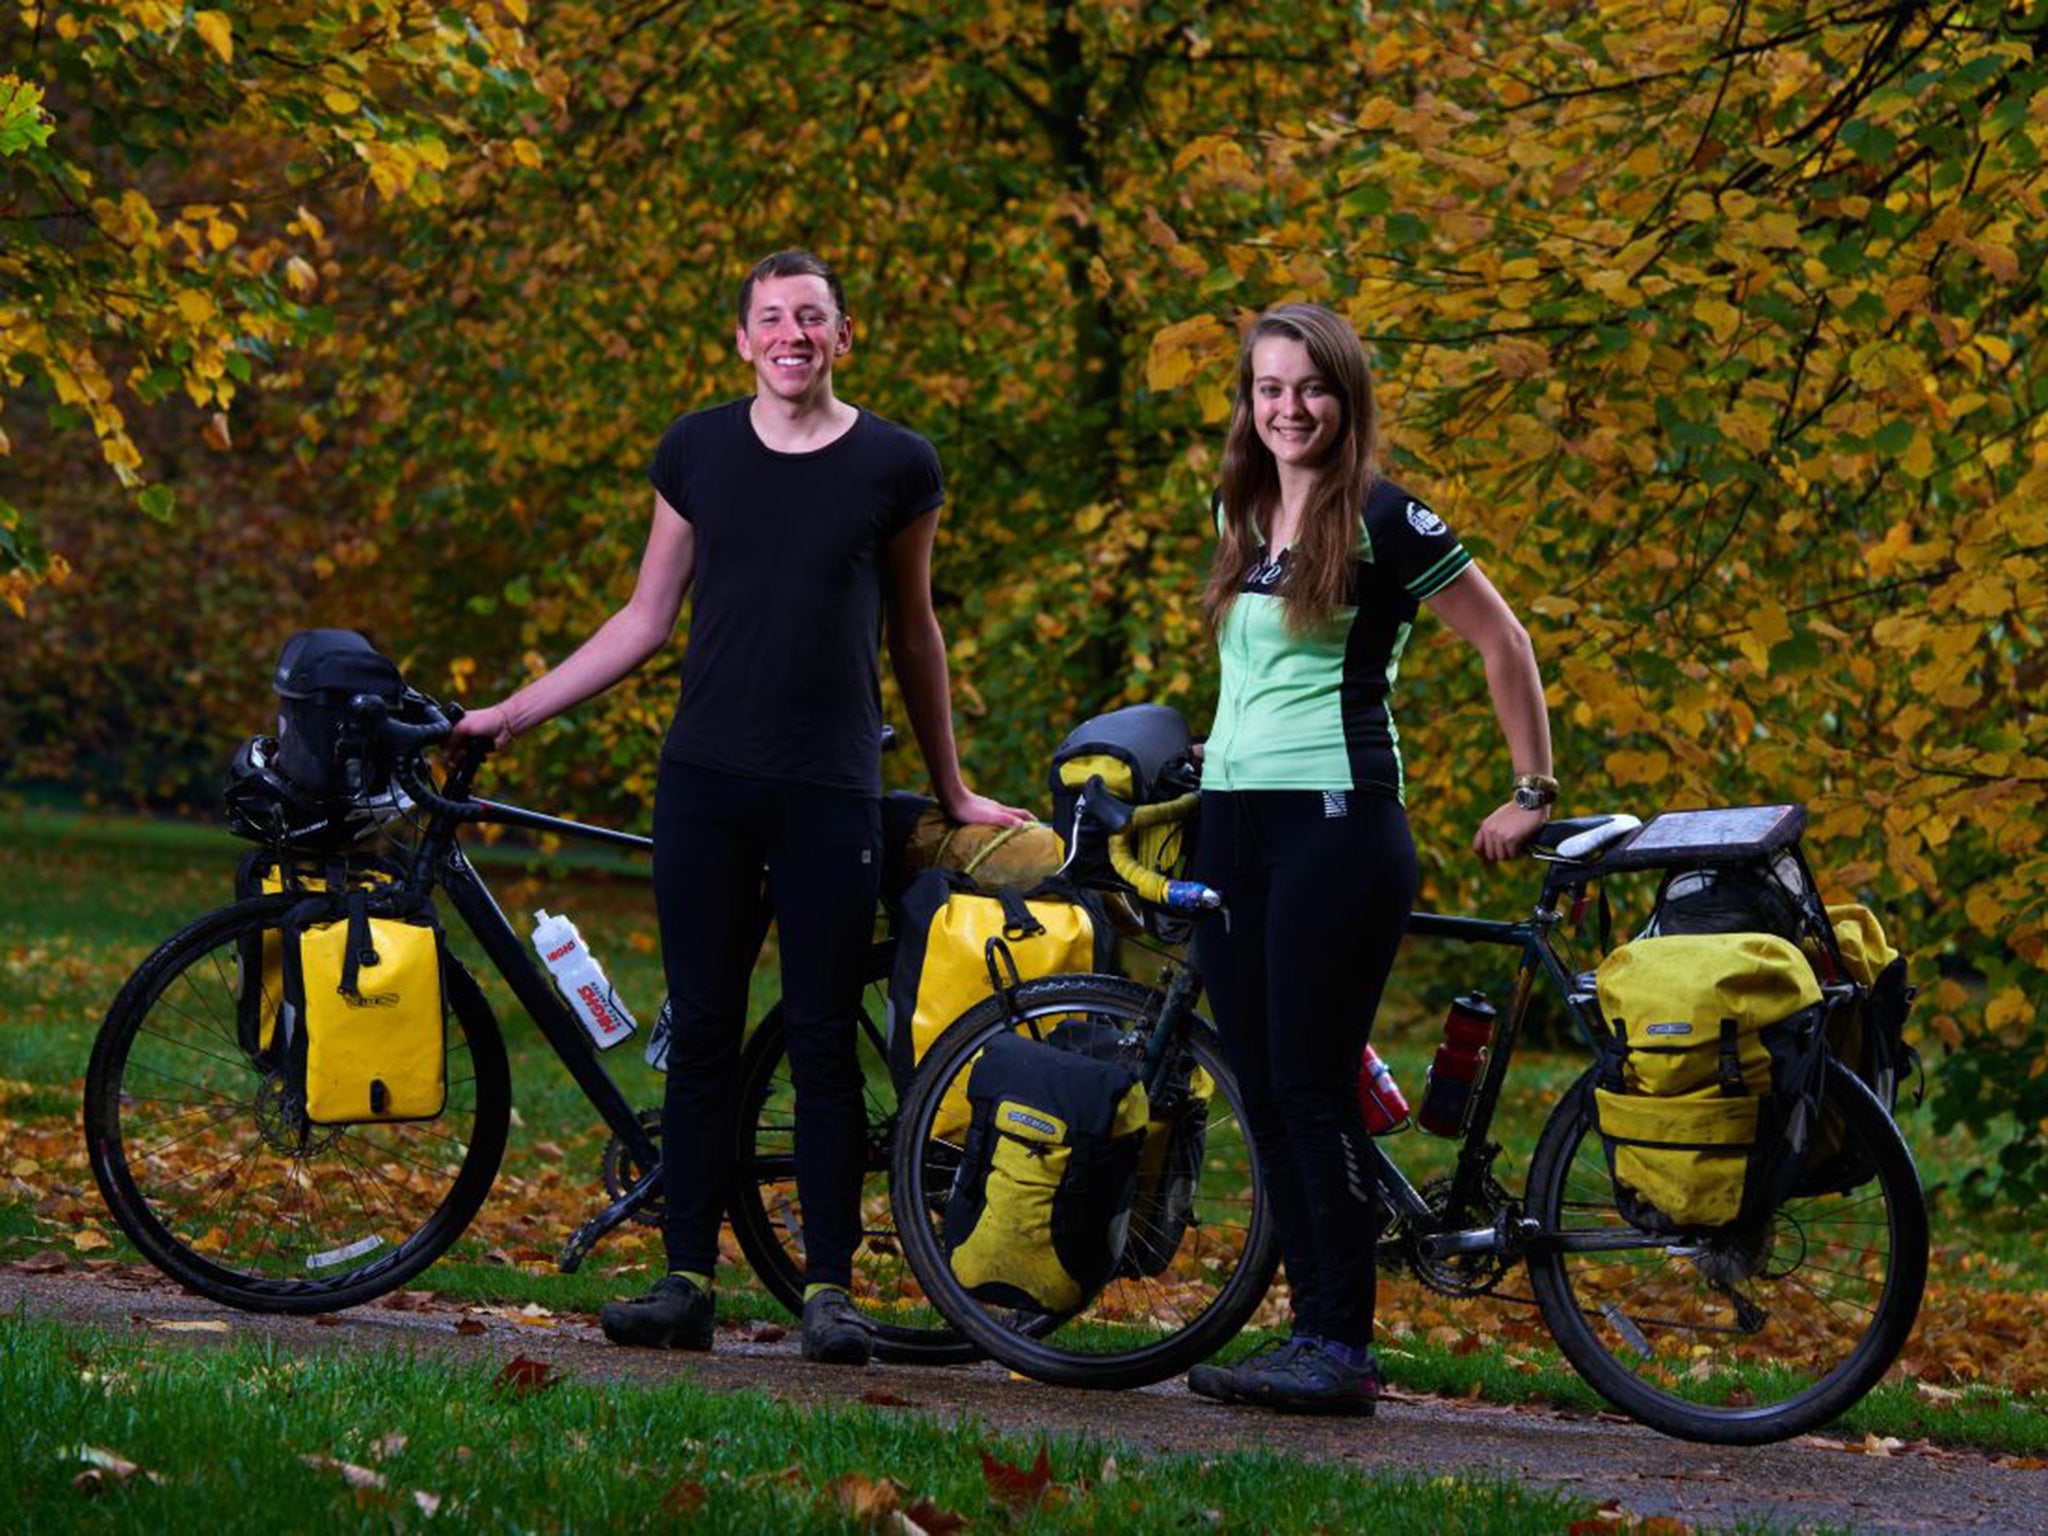 Morgan Curtis and Garrett Blad, of Climate Journey cycling expedition